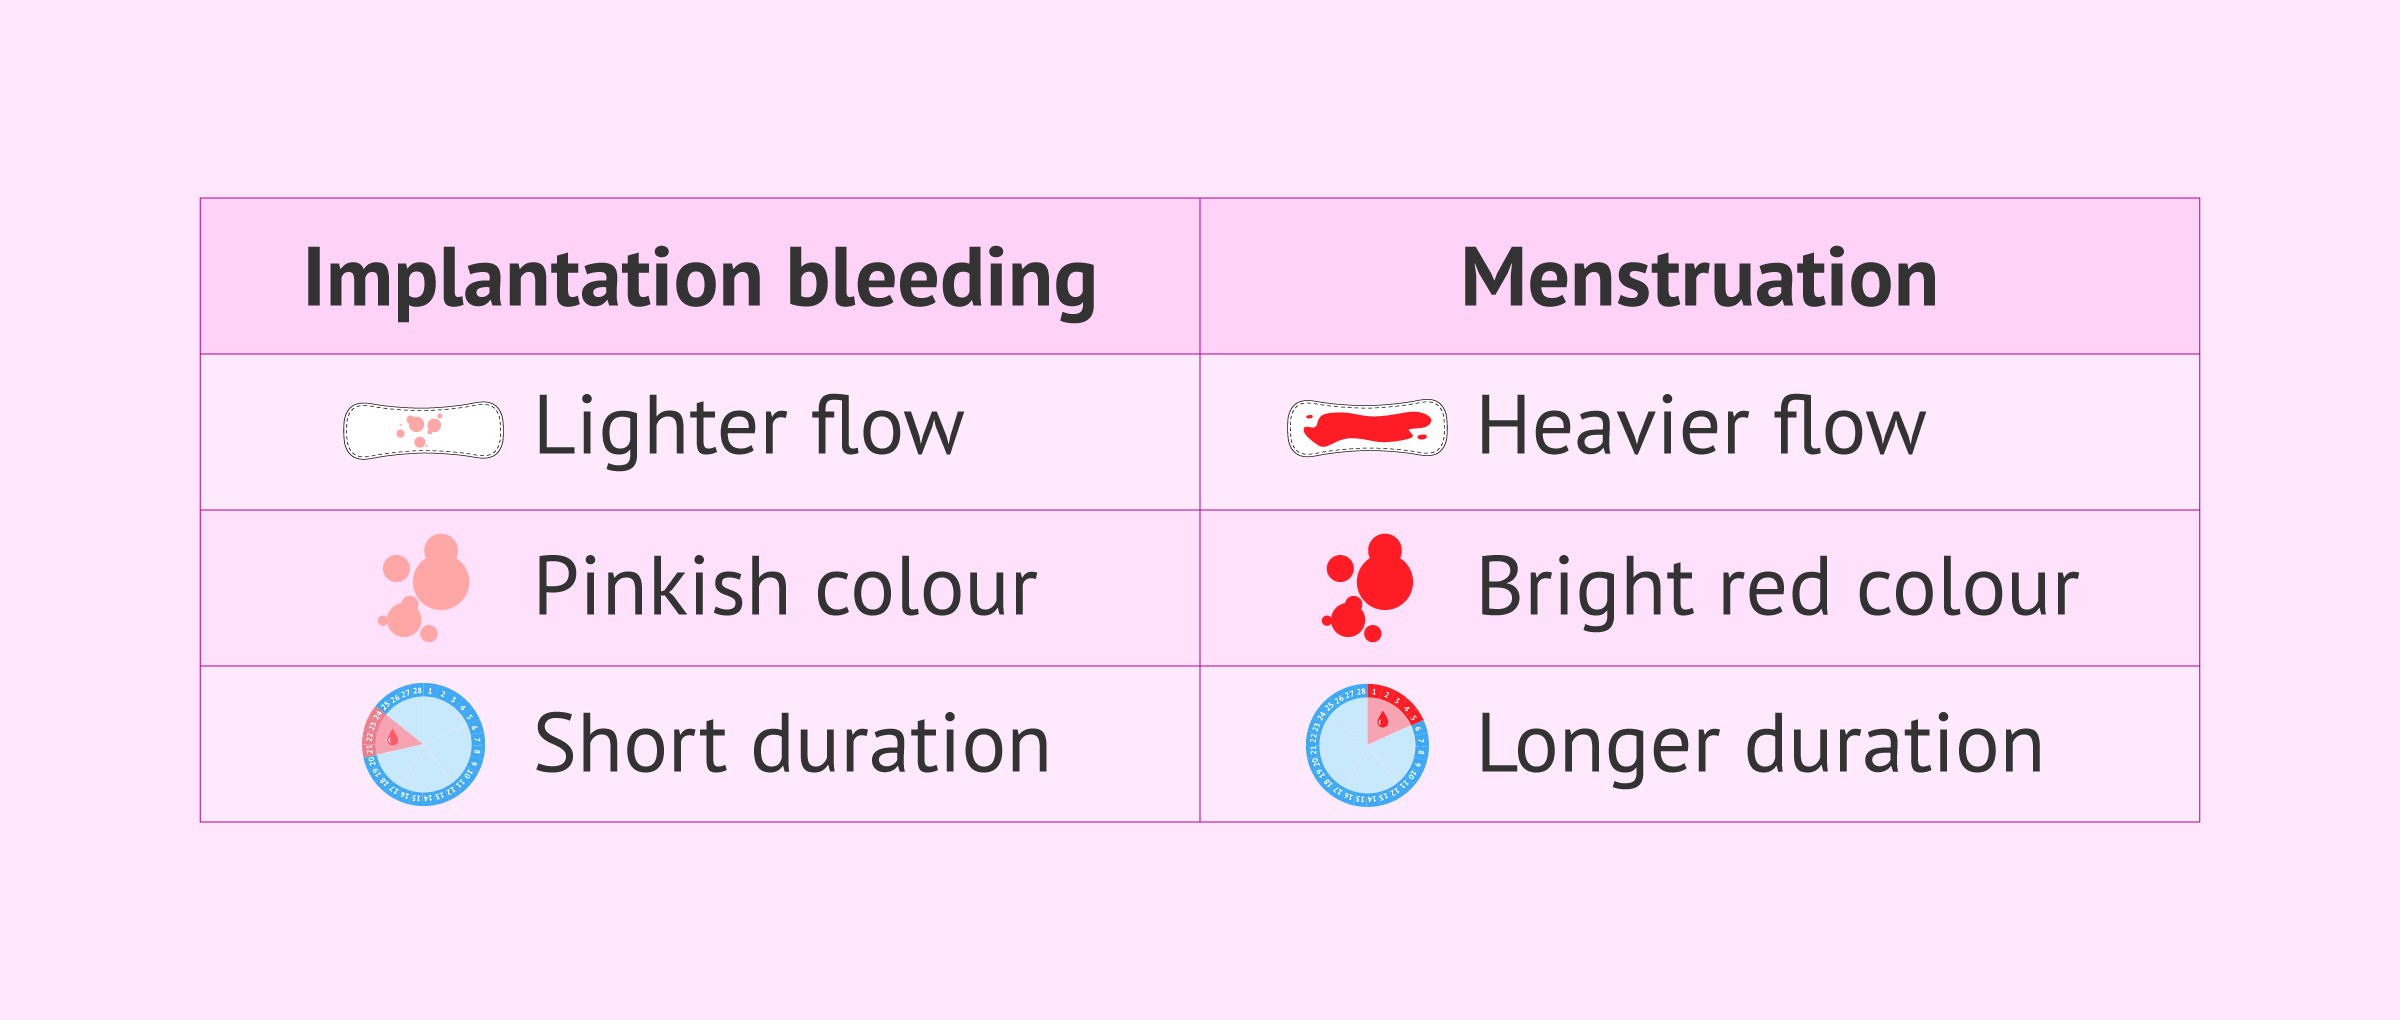 Differences between menstruation and implantation bleeding.